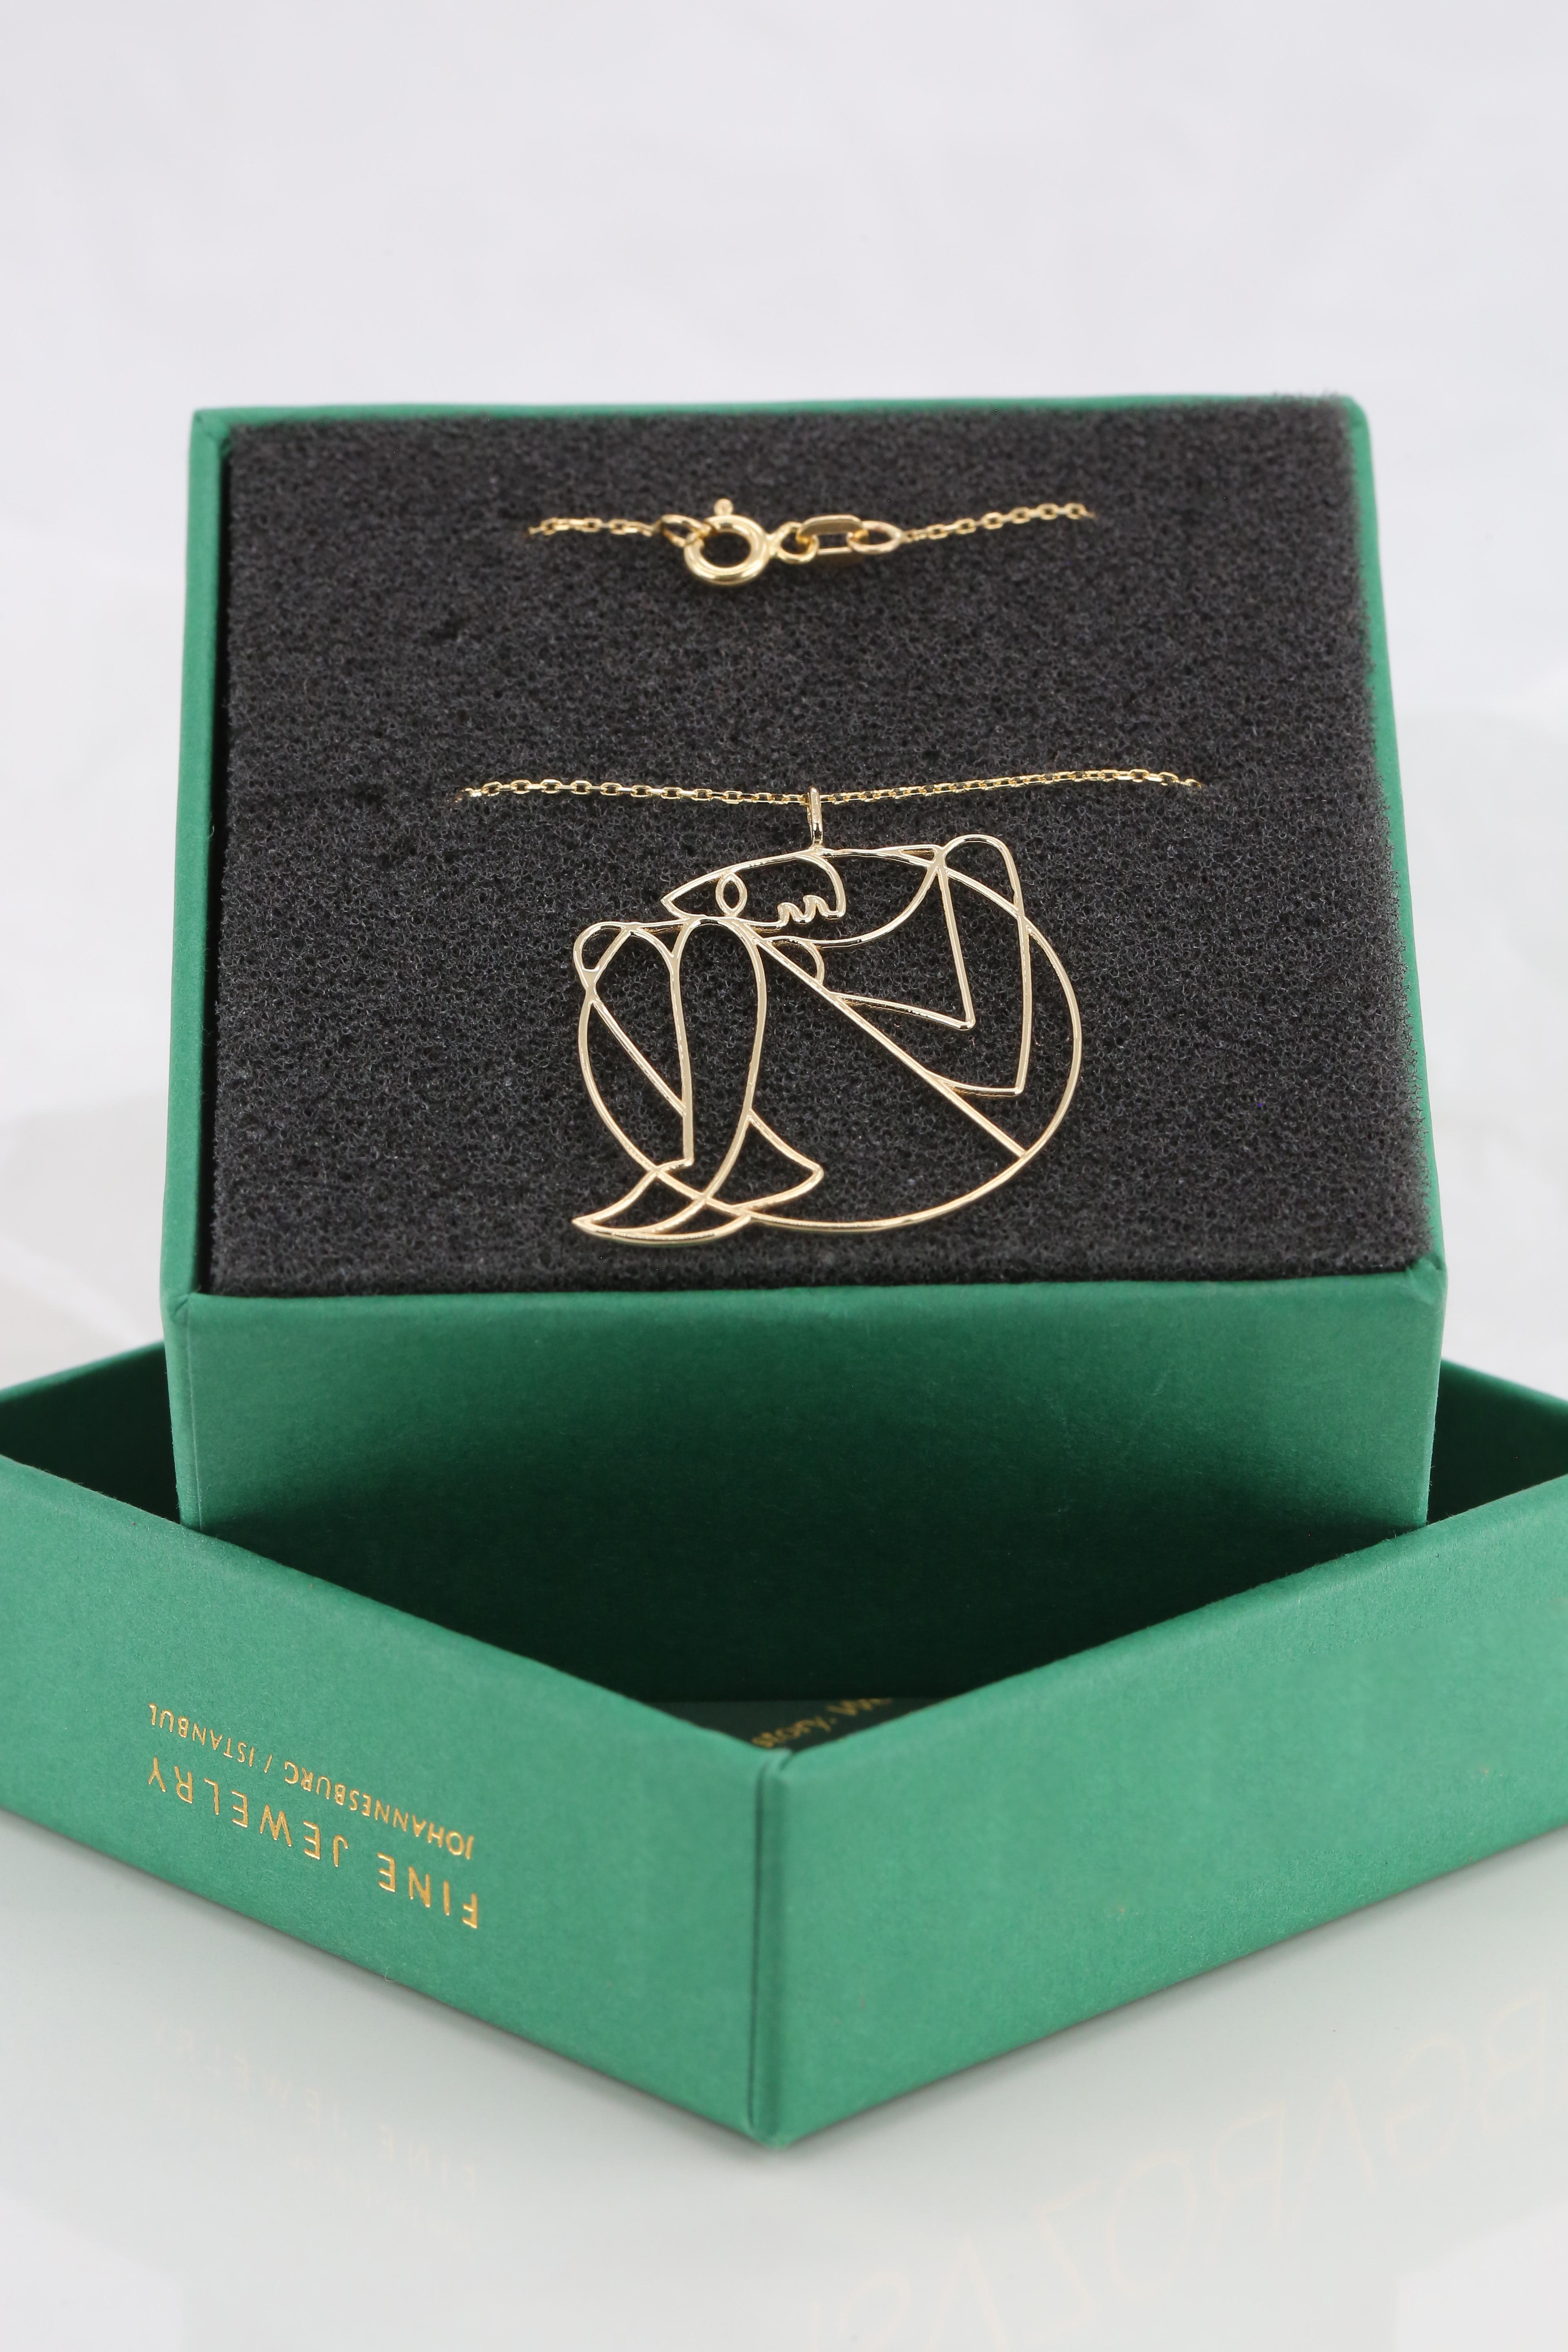 Human in the Womb in Fetal Position Necklace 14k Gold, Golden Ratio ...